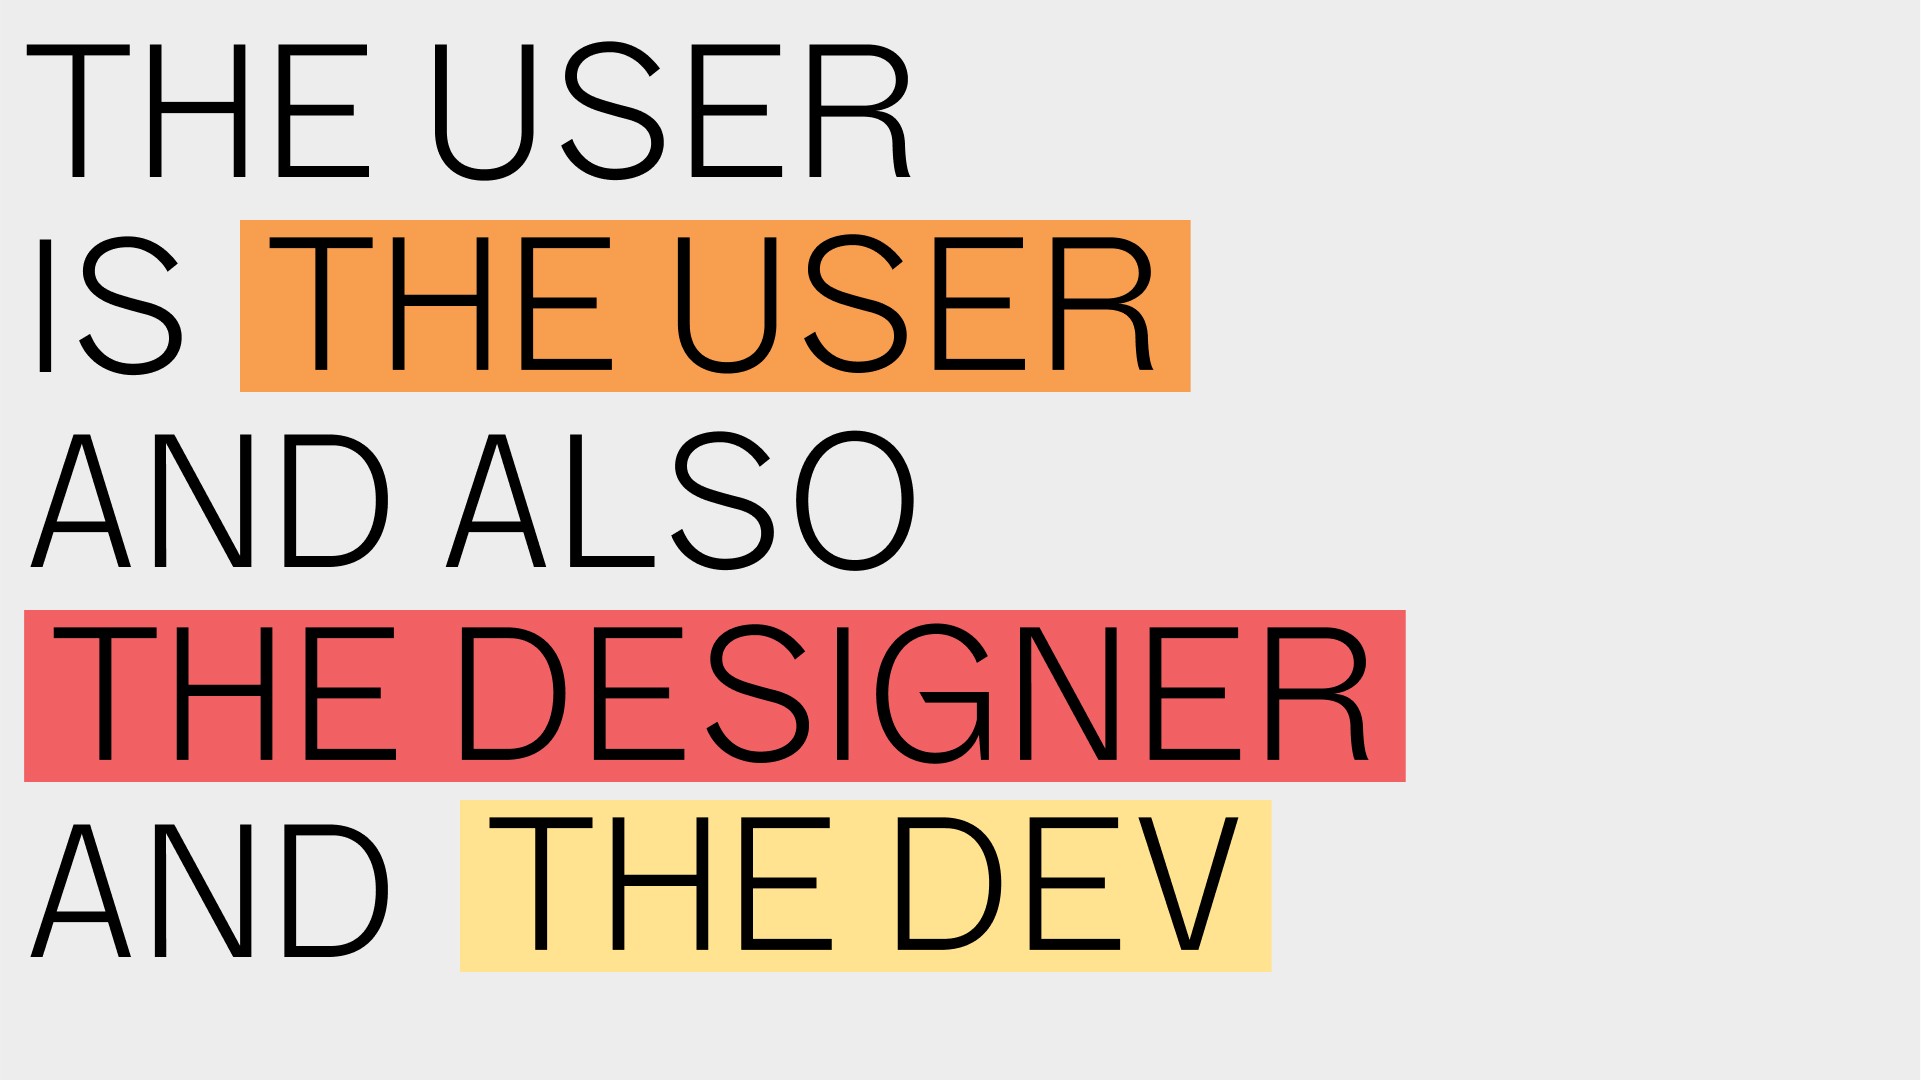 Cover slide that reads: 'The user is the user, but also the designer and the dev.'